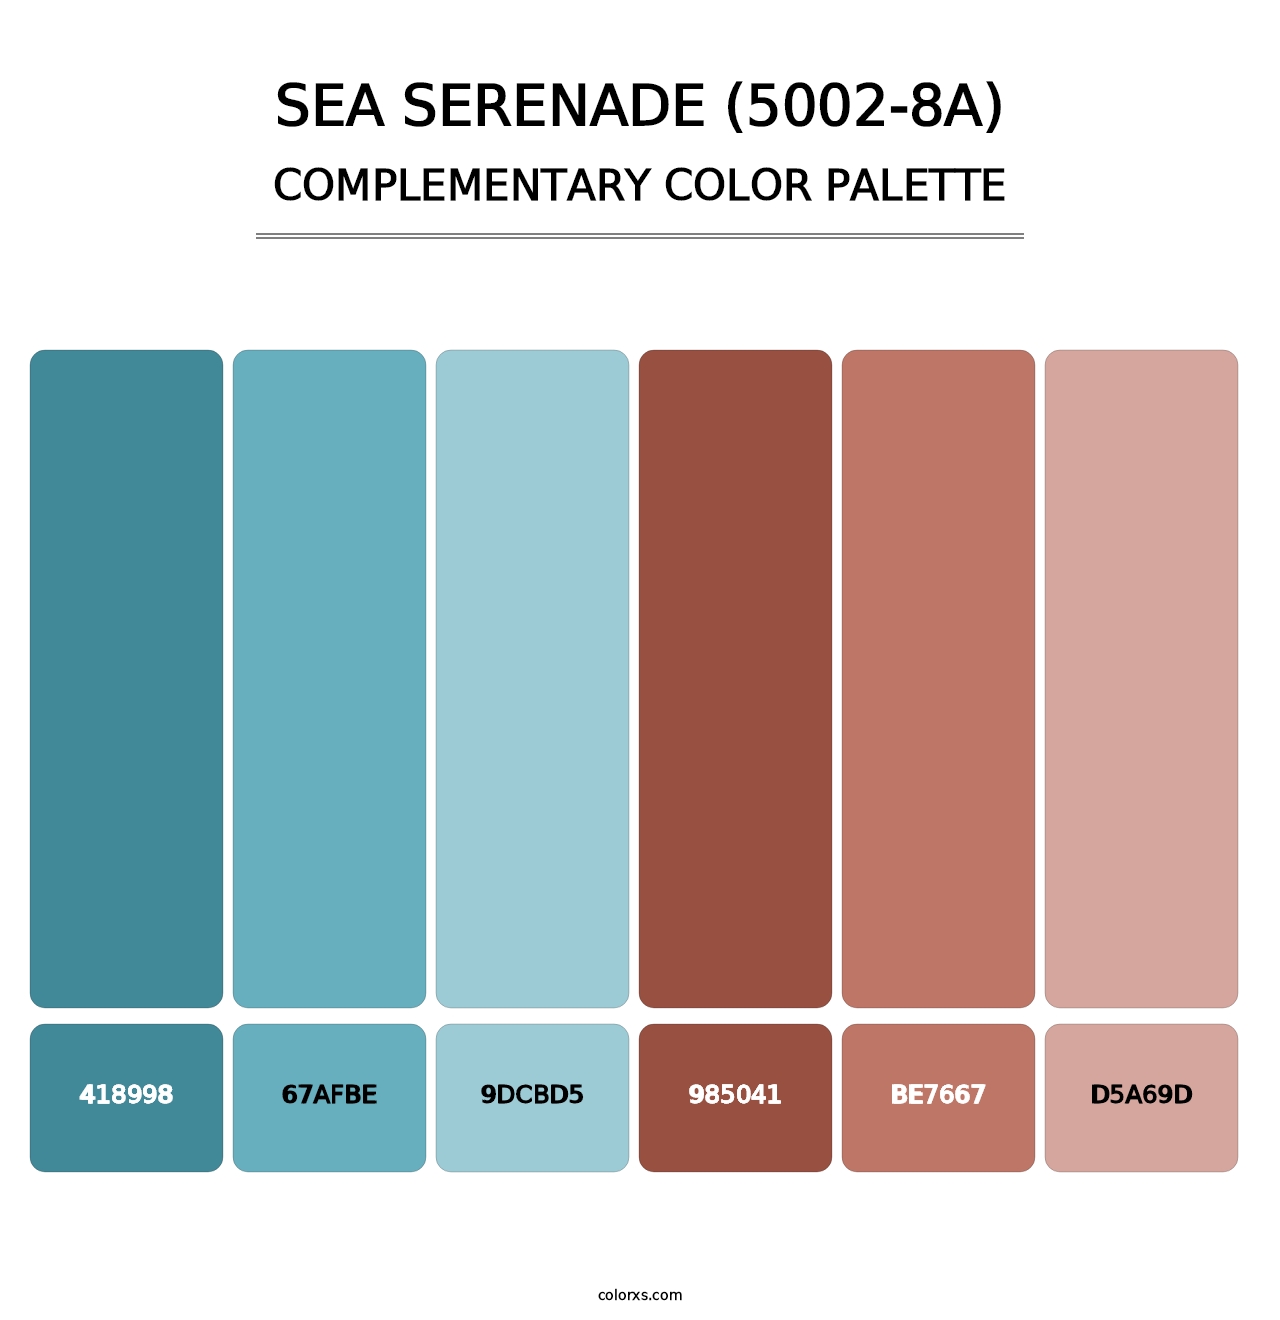 Sea Serenade (5002-8A) - Complementary Color Palette